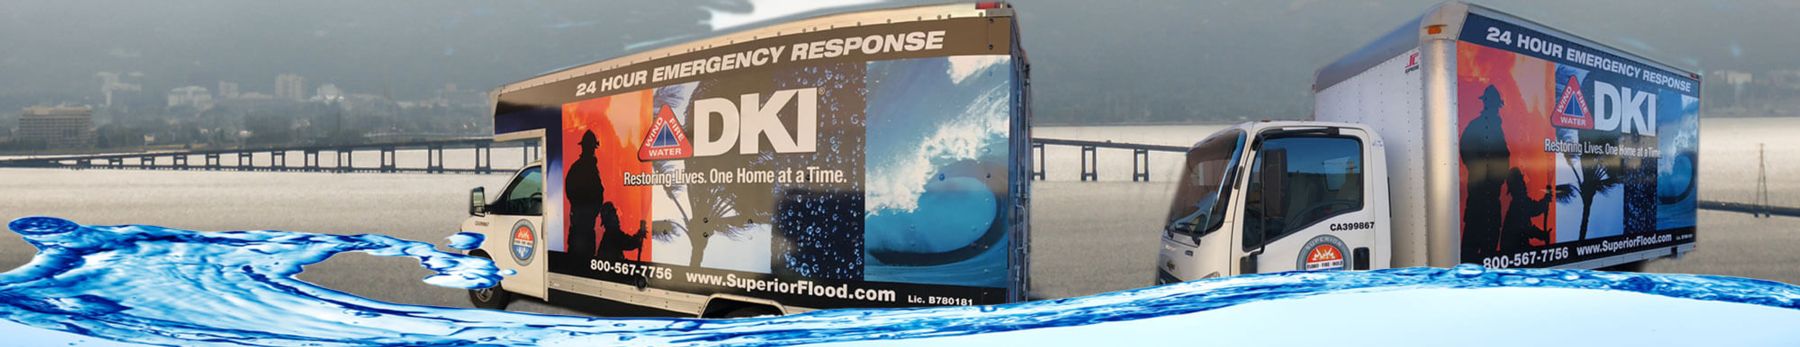 Water Damage Removal and Restoration in the South Bay Area